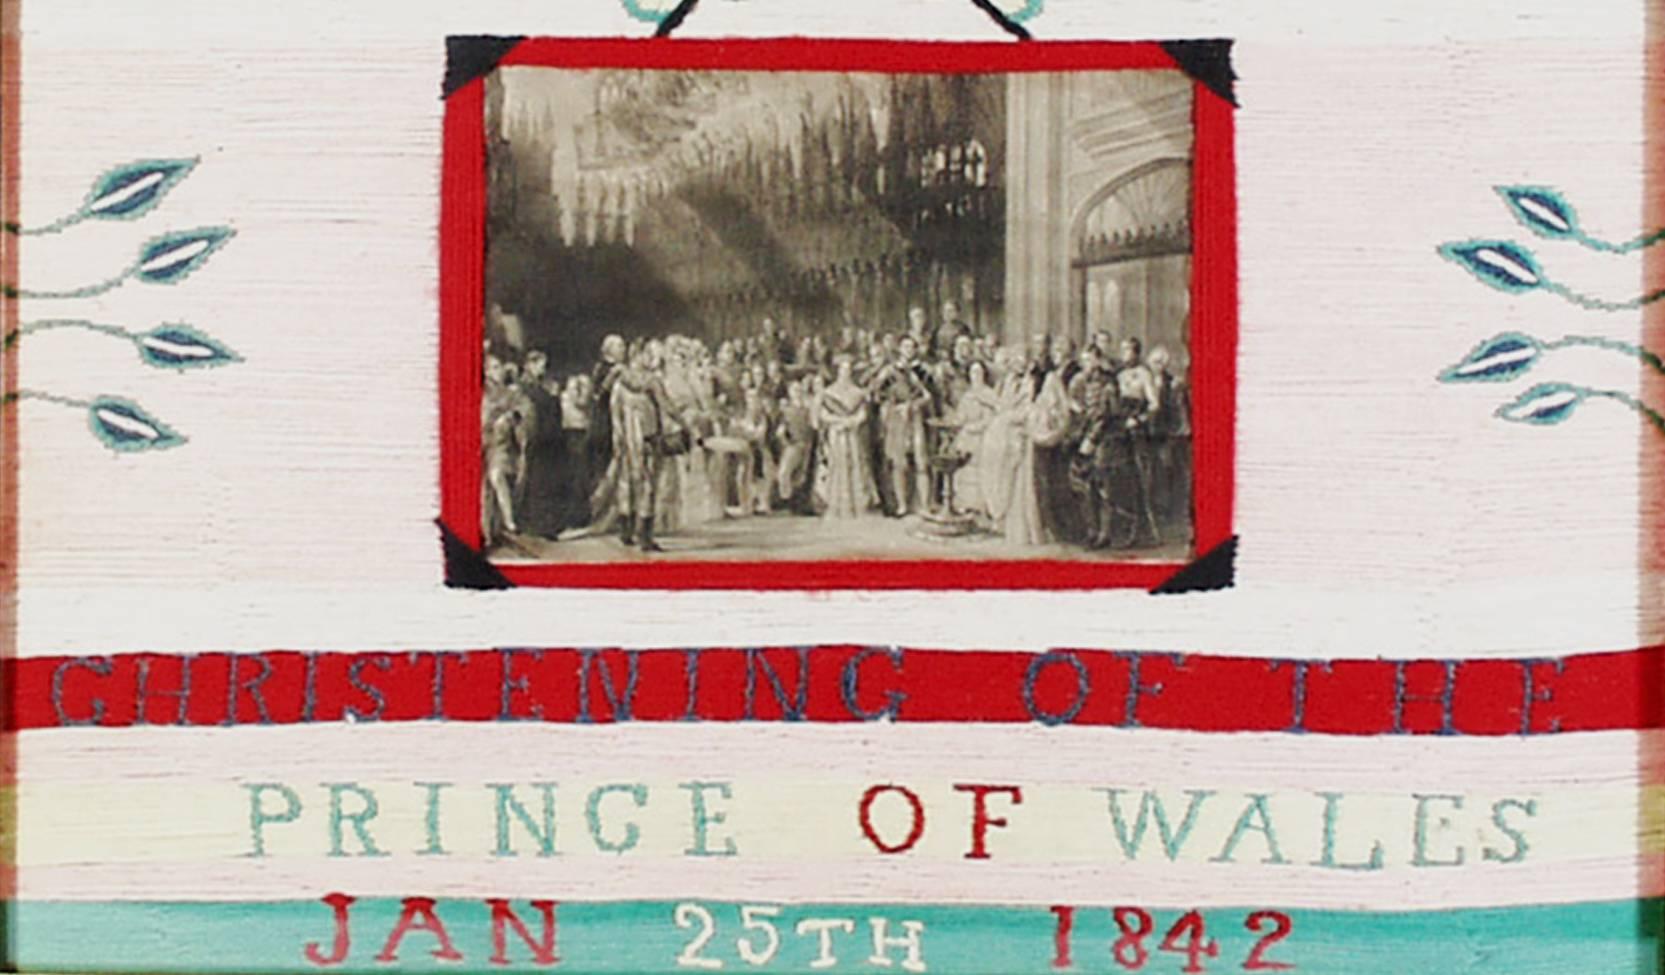 English Royal Woolwork Picture,
Titled E R/ Christening of the/Prince of Wales/Jan 25th 1842.

A rare woolwork picture in bands of white, pink, red and green centered with a black and white picture framed in red wool of the christening of the